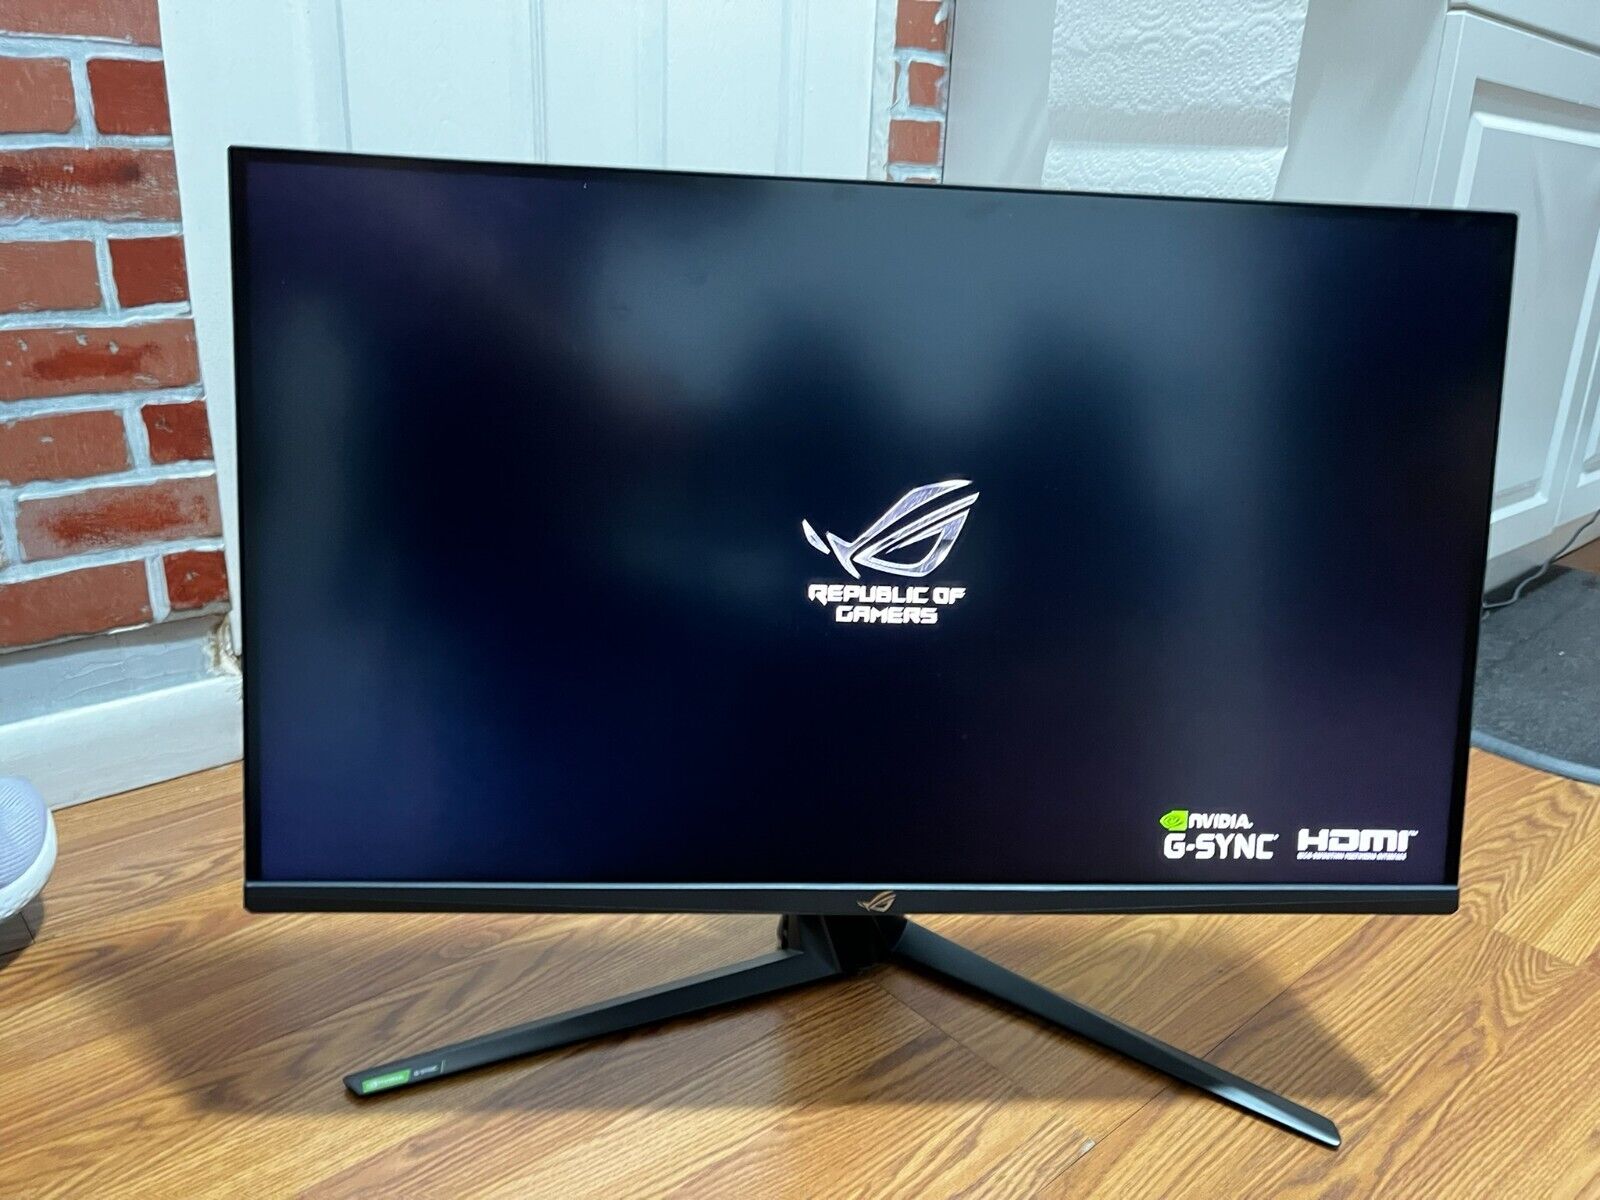 ASUS ROG Swift 32” Gaming Monitor 1440P WQHD 2560x1440. Used, perfect condition.